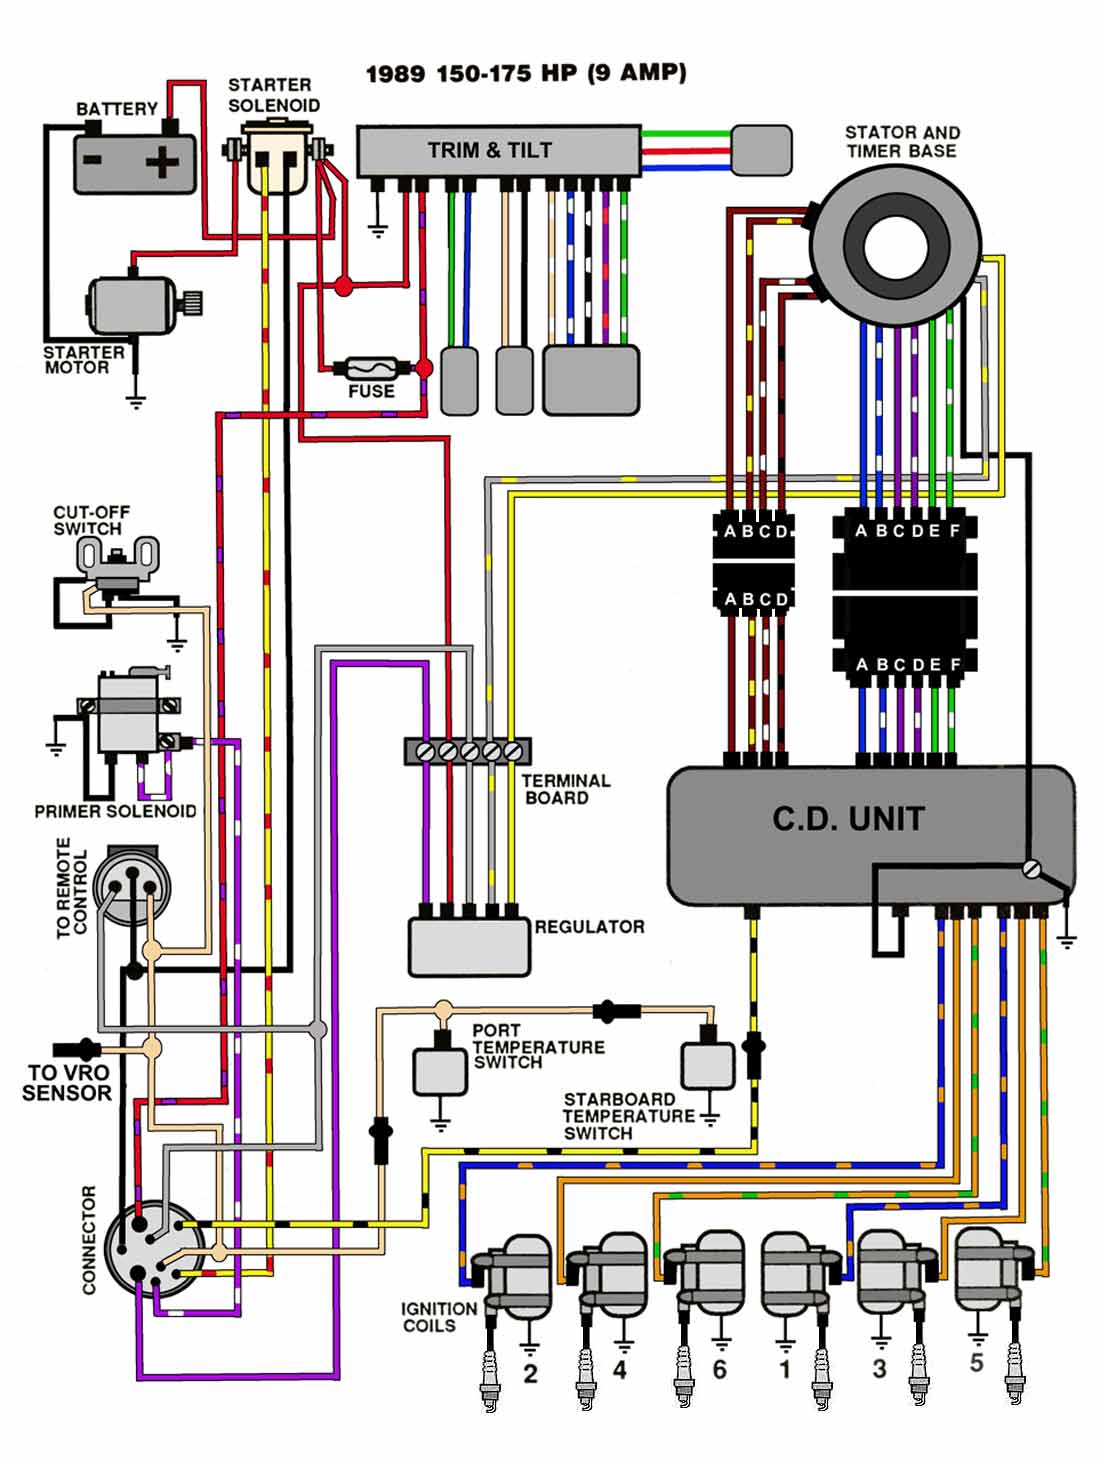 Ignition Johnson Outboard Starter Solenoid Wiring Diagram from maxrules.com